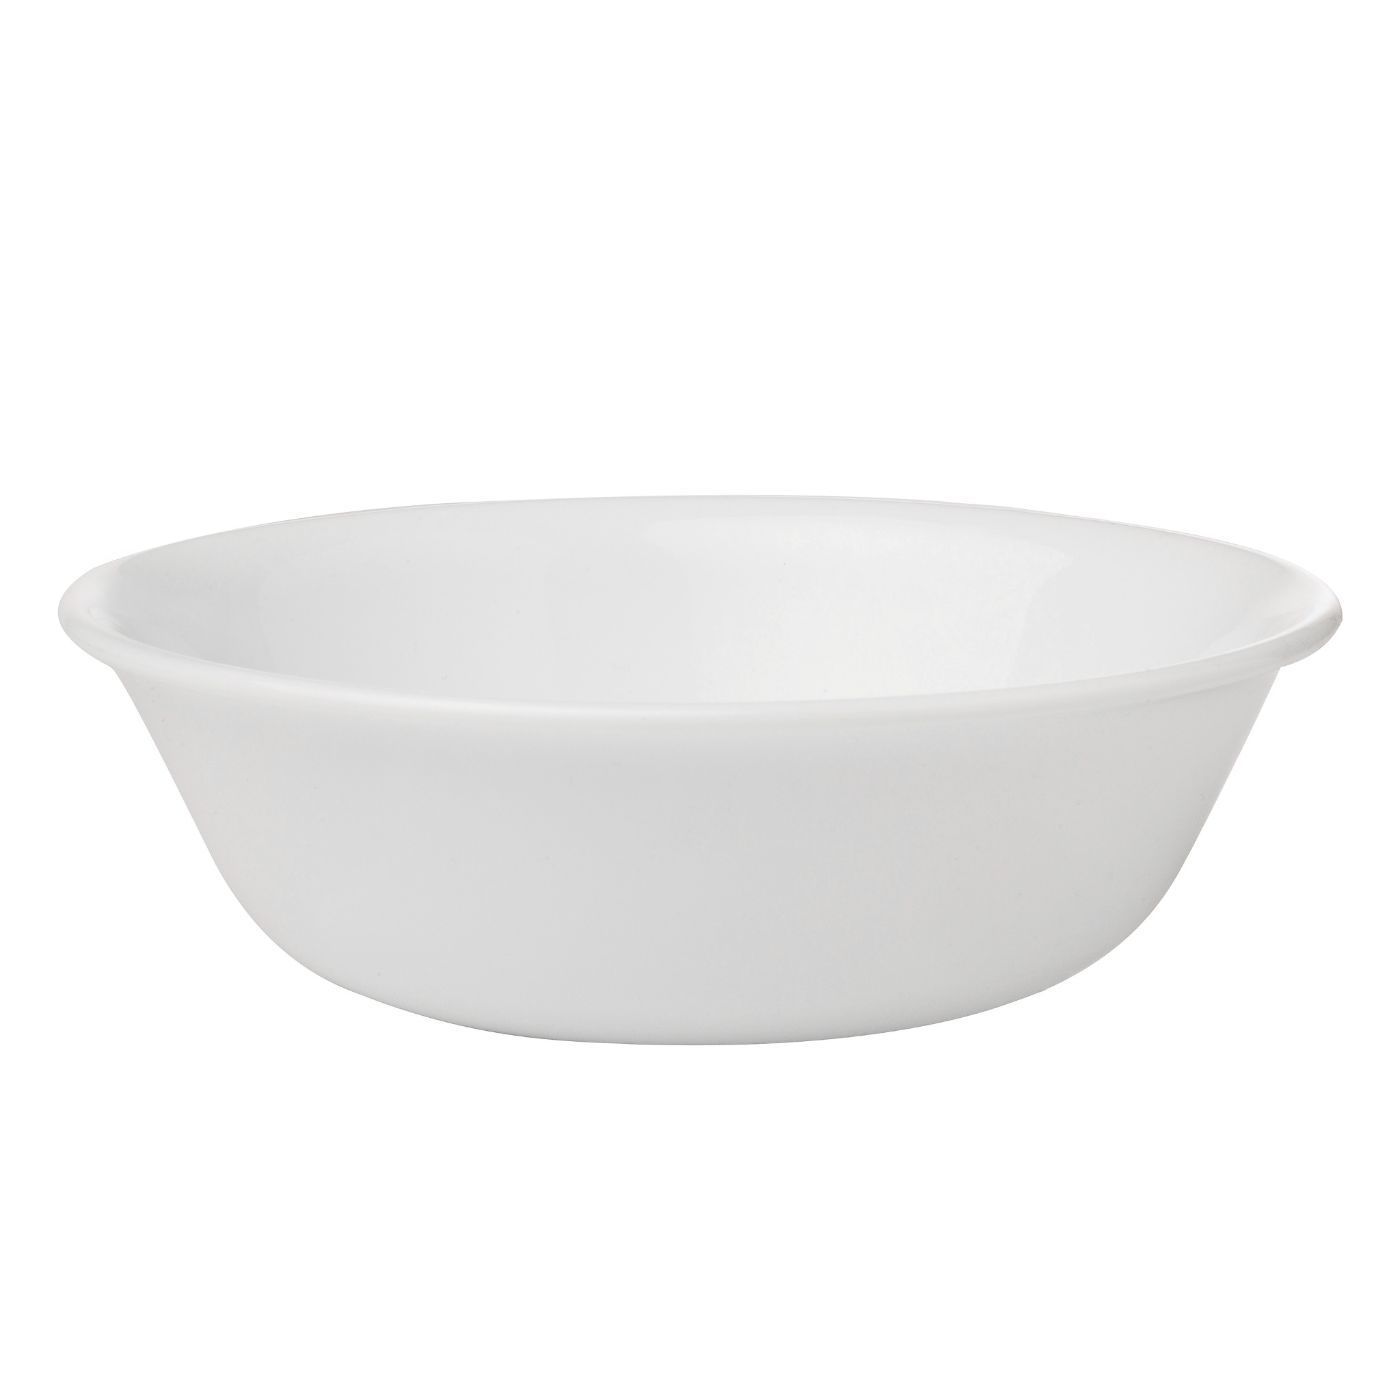 Primary image for Corelle Winter Frost White 10-ounce Dip & Condiment Bowl